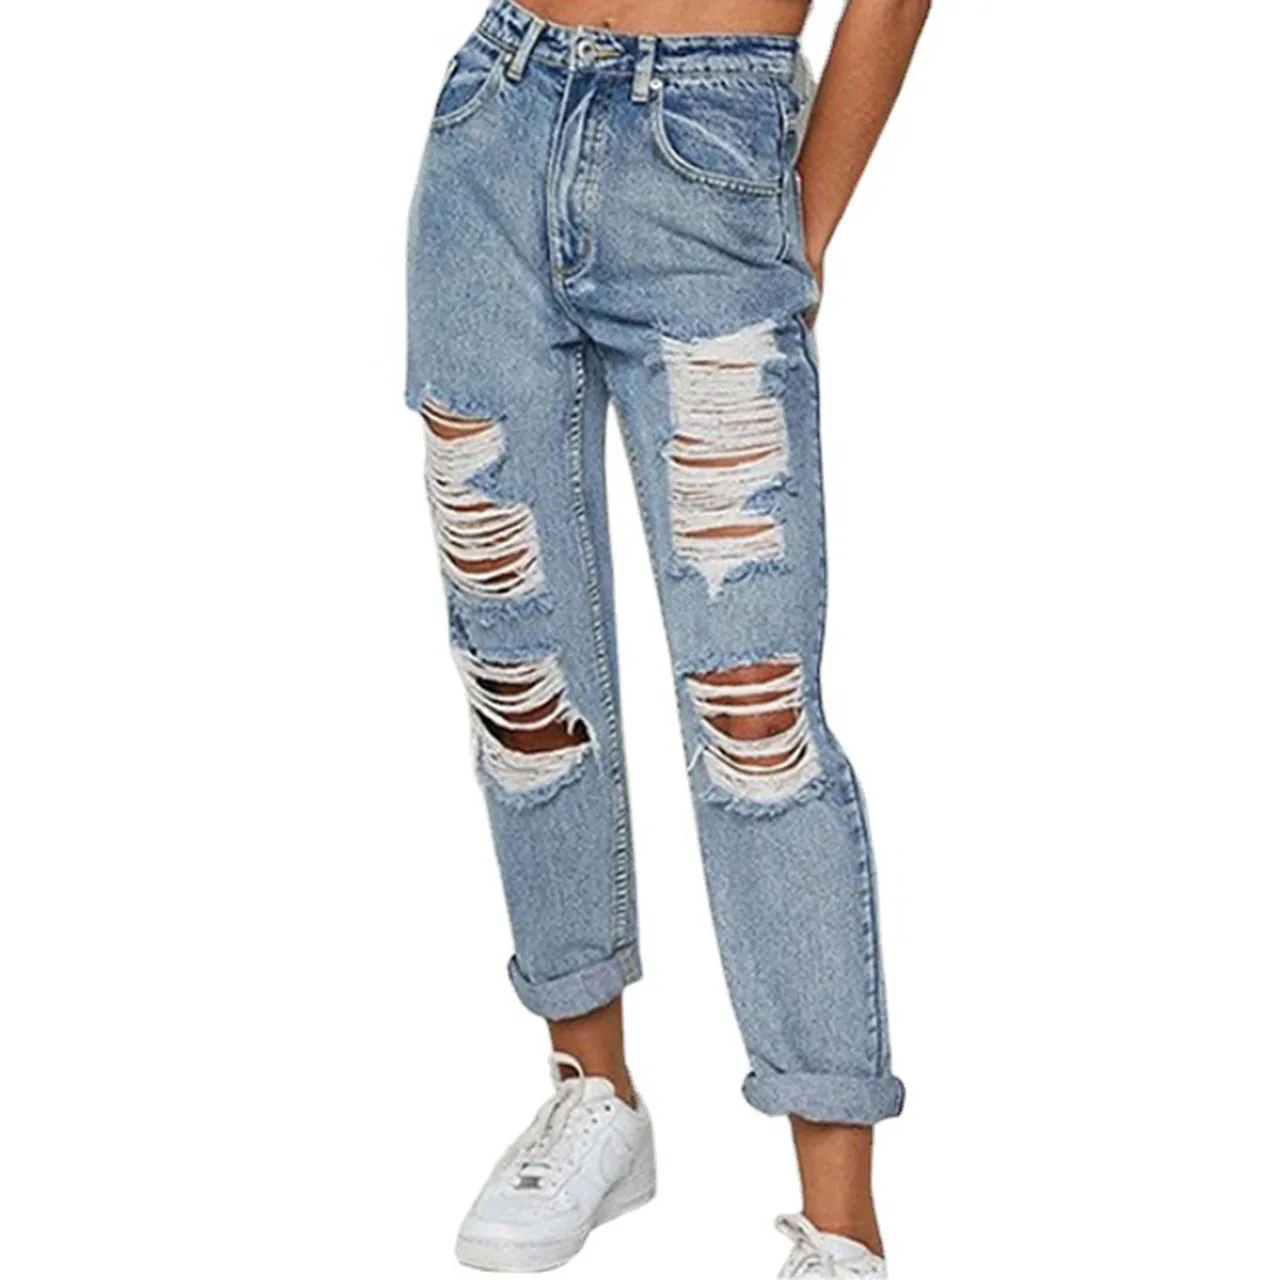 

Woman Jeans High Waist Ripped Jeans For Thin Jeans Denim Breeches Overalls 2020 Vintage Female Long Trousers Torn Trousers